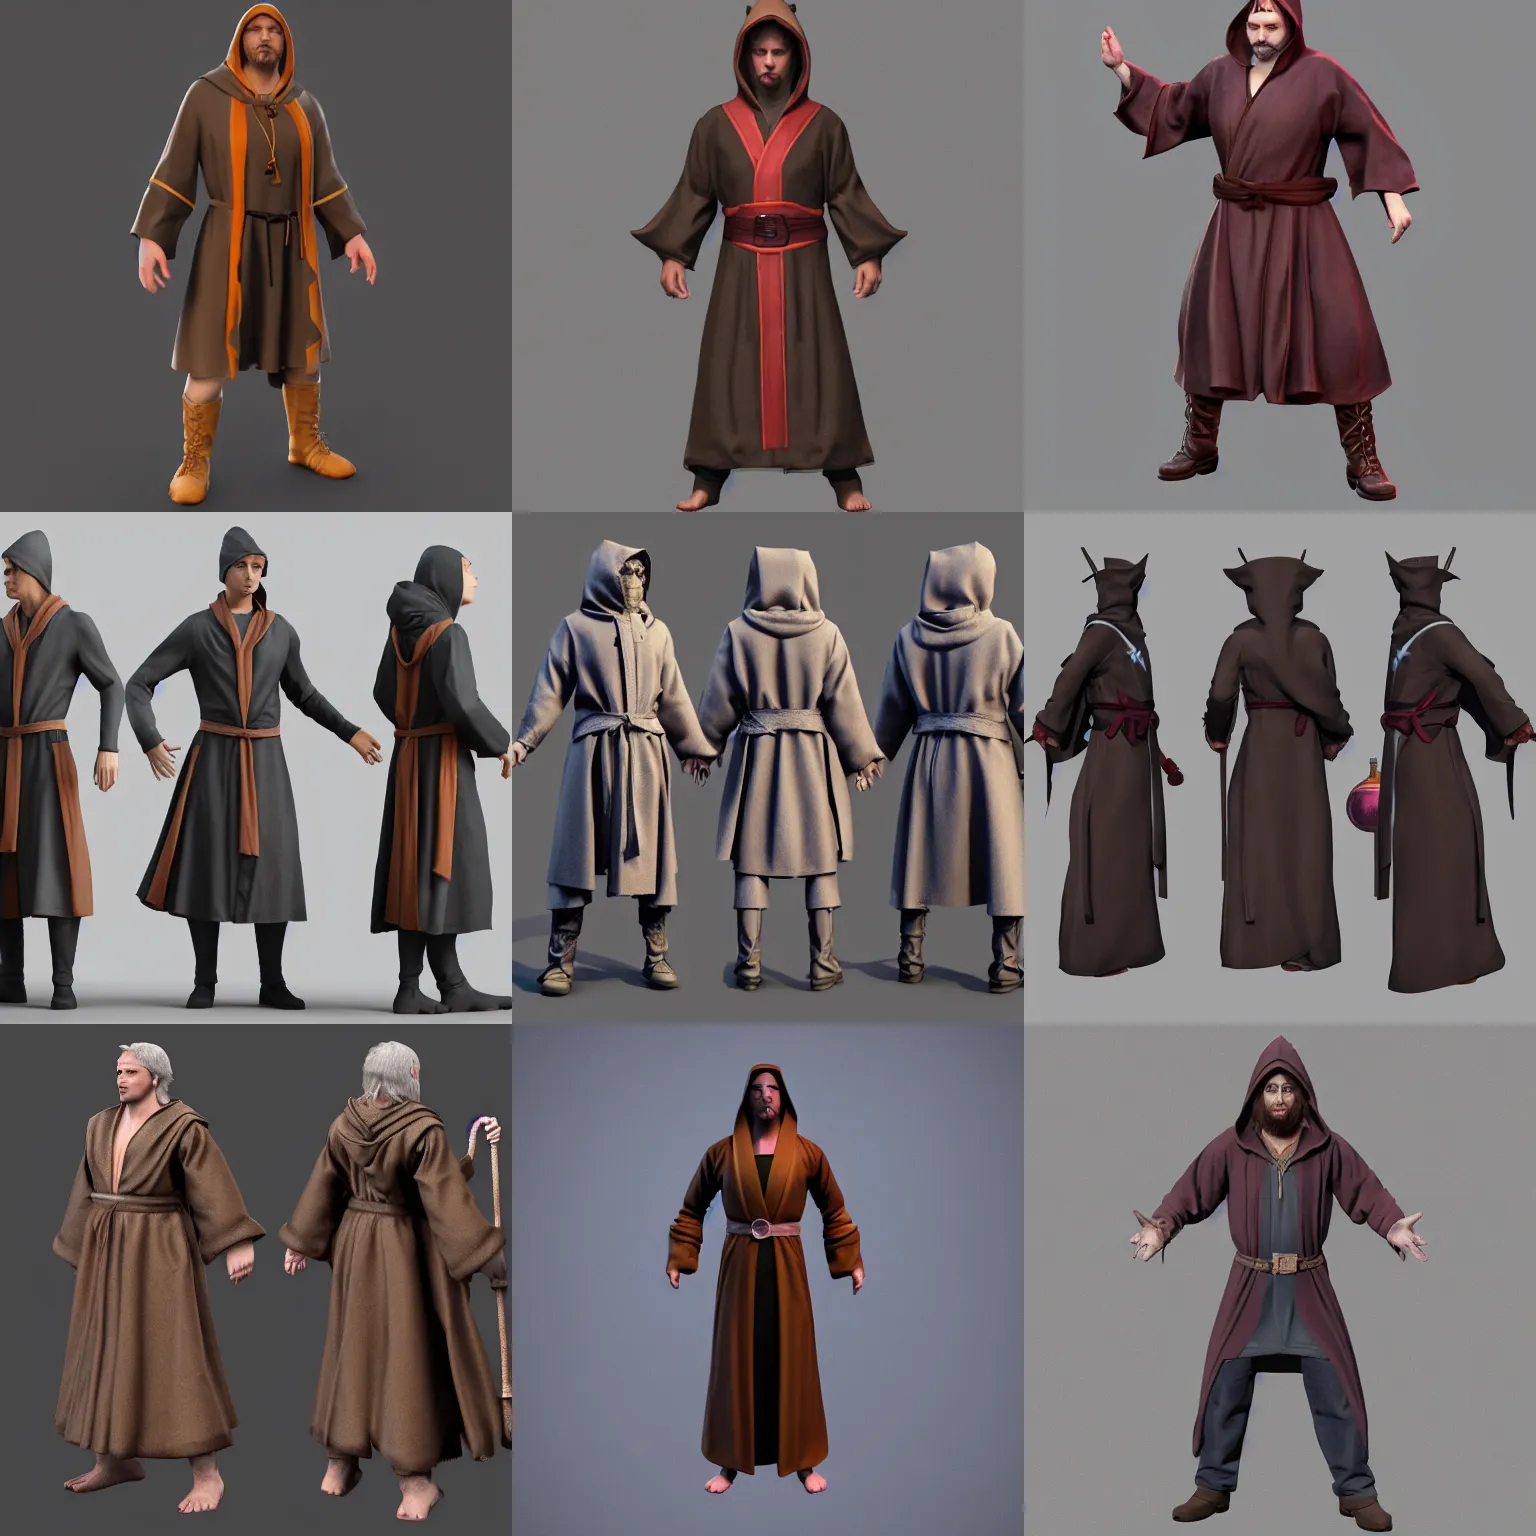 Prompt: 3d model rigged, t-pose of male magic wizard, potions, belt, robes, hood, T Pose, 3d marketplace, front view, side view, character design, RPG character, cosplay, DAZ, zbrush, 3dsmax,